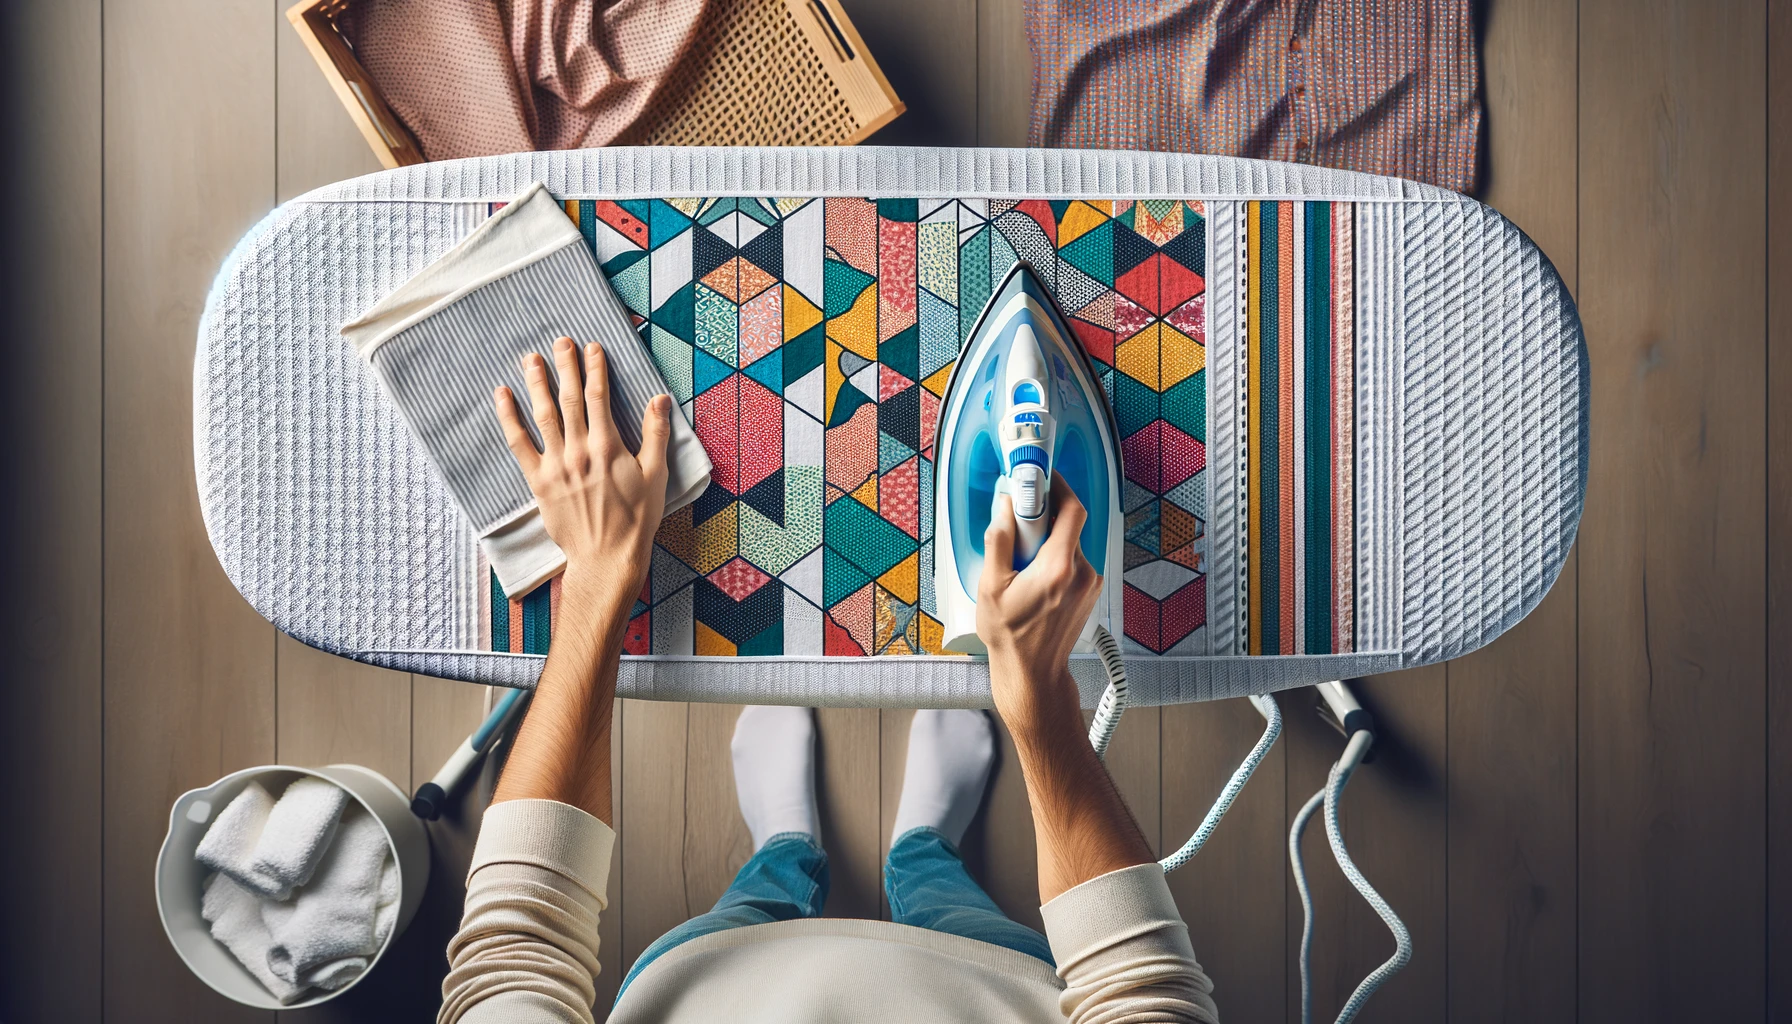 Overhead view of hands ironing a patterned fabric on an ironing board.